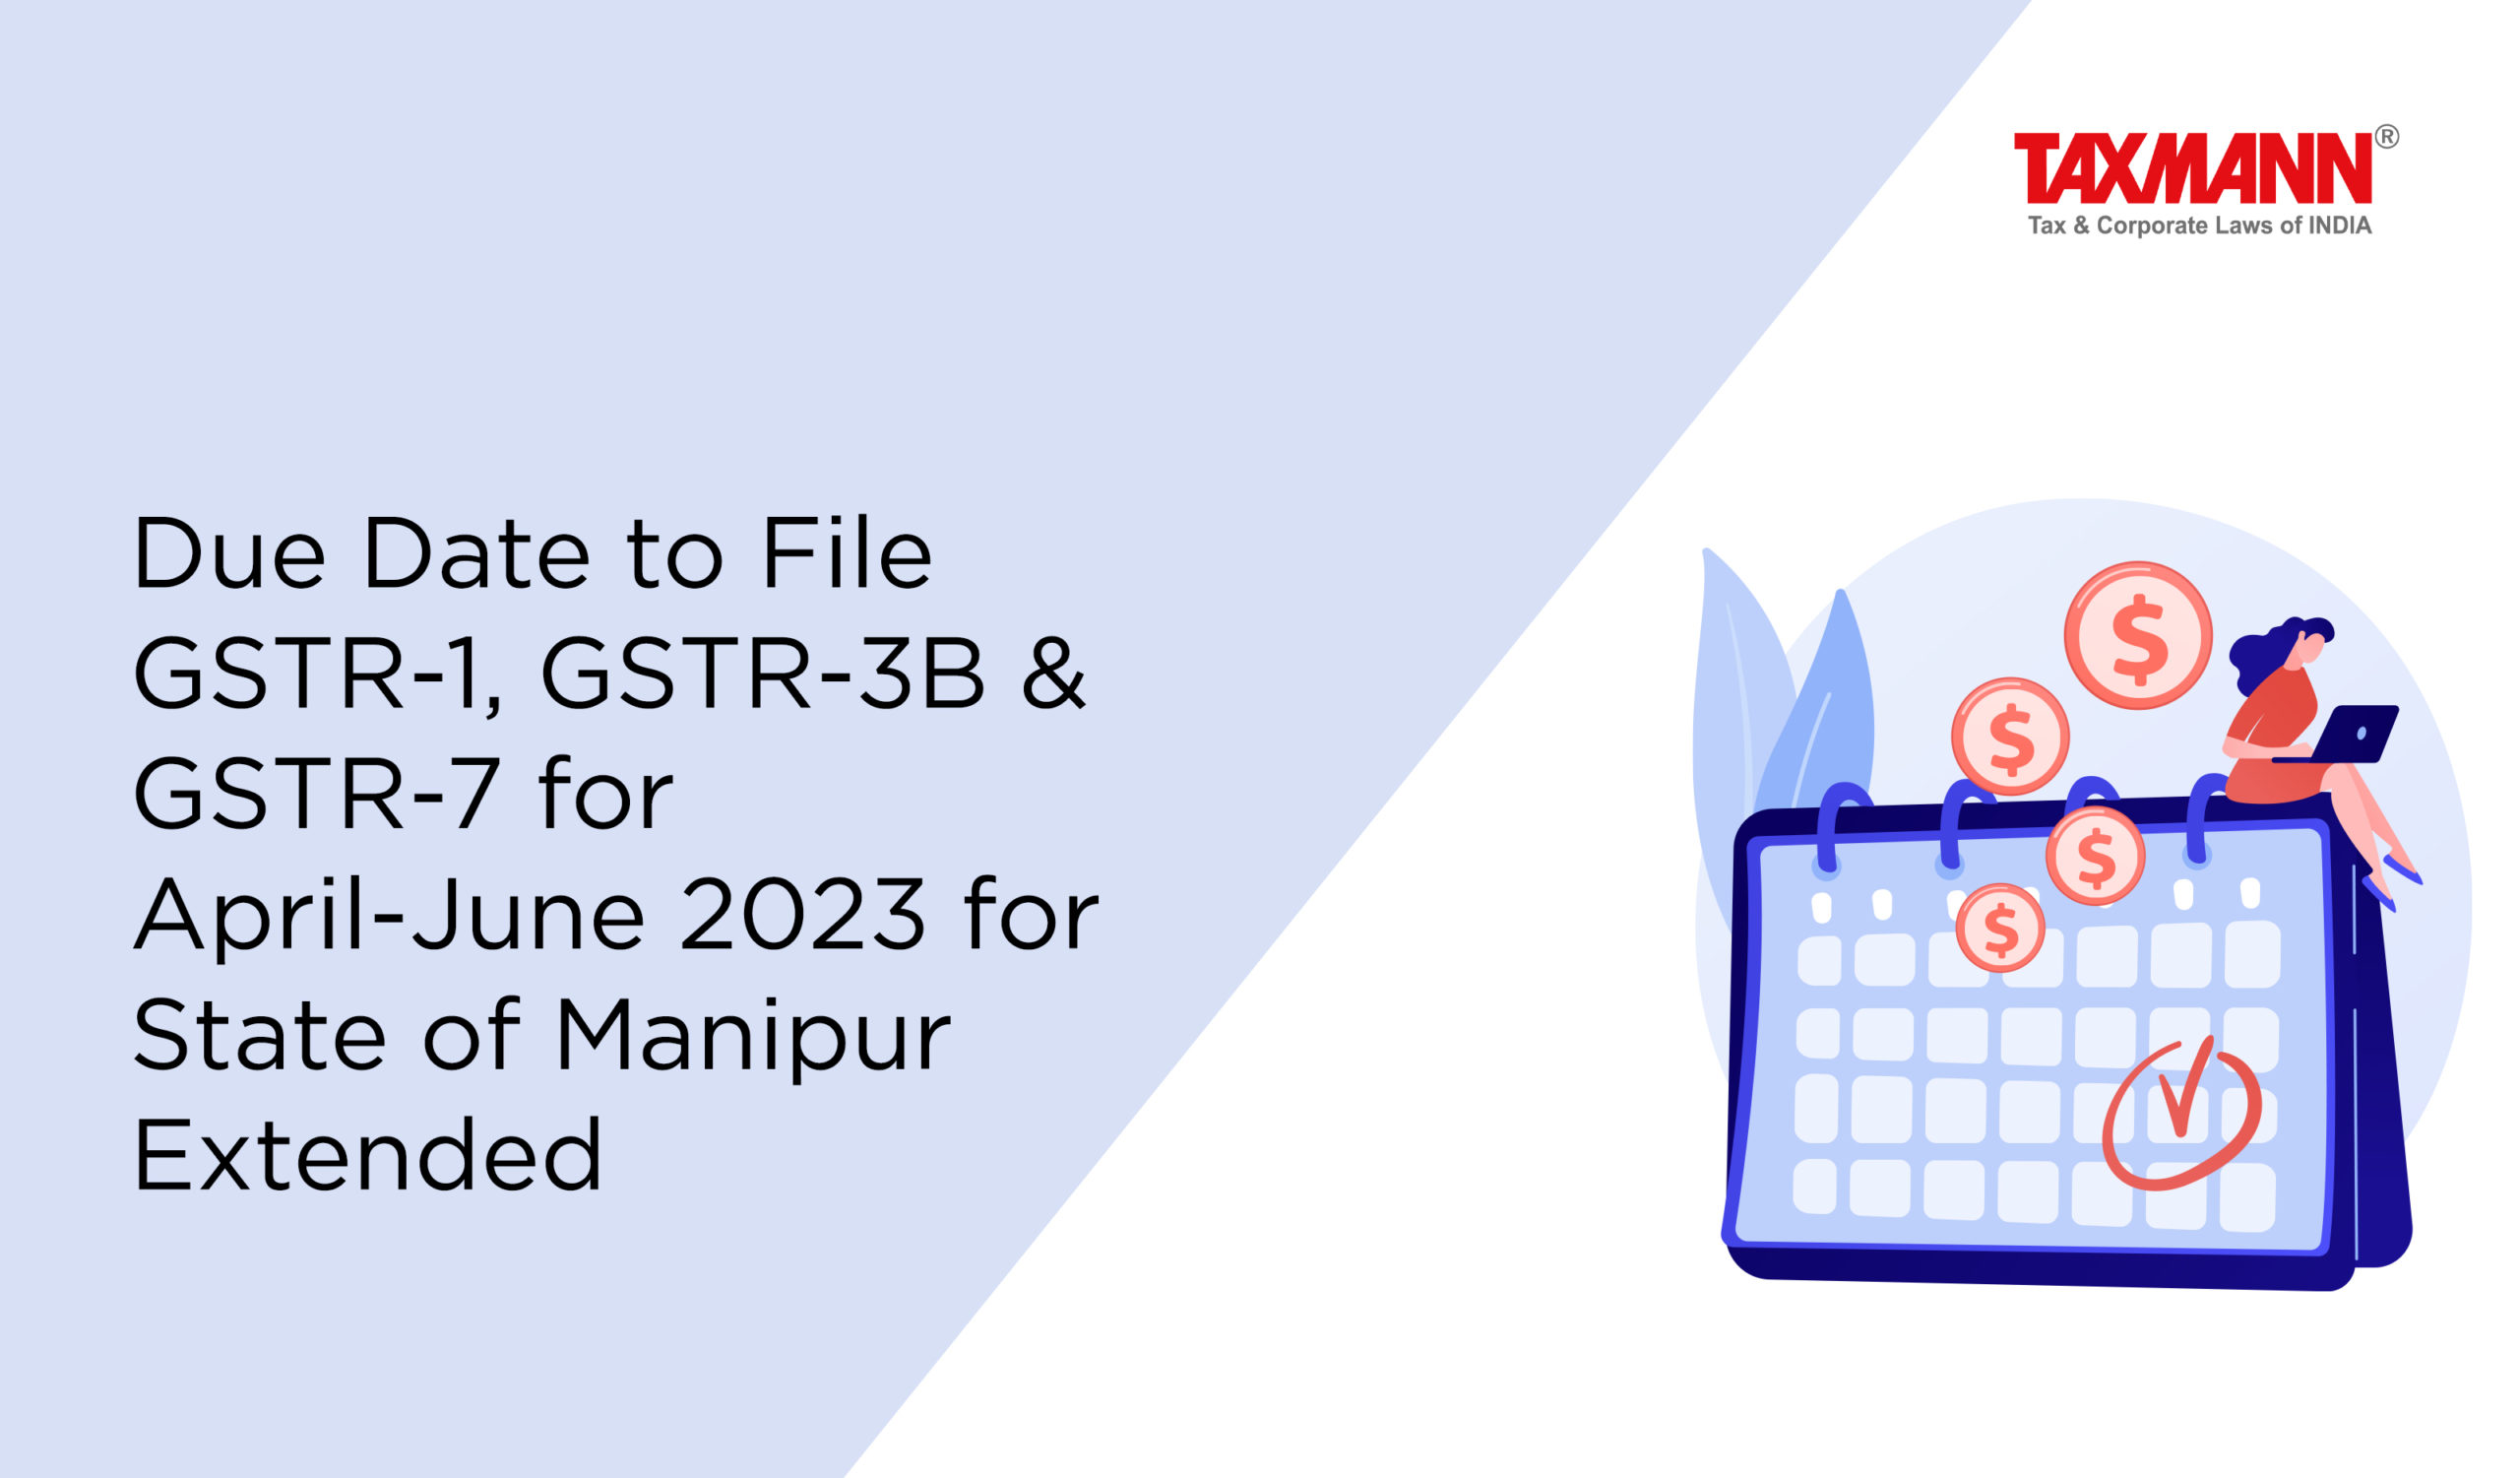 Due Date to File GSTR in Manipur